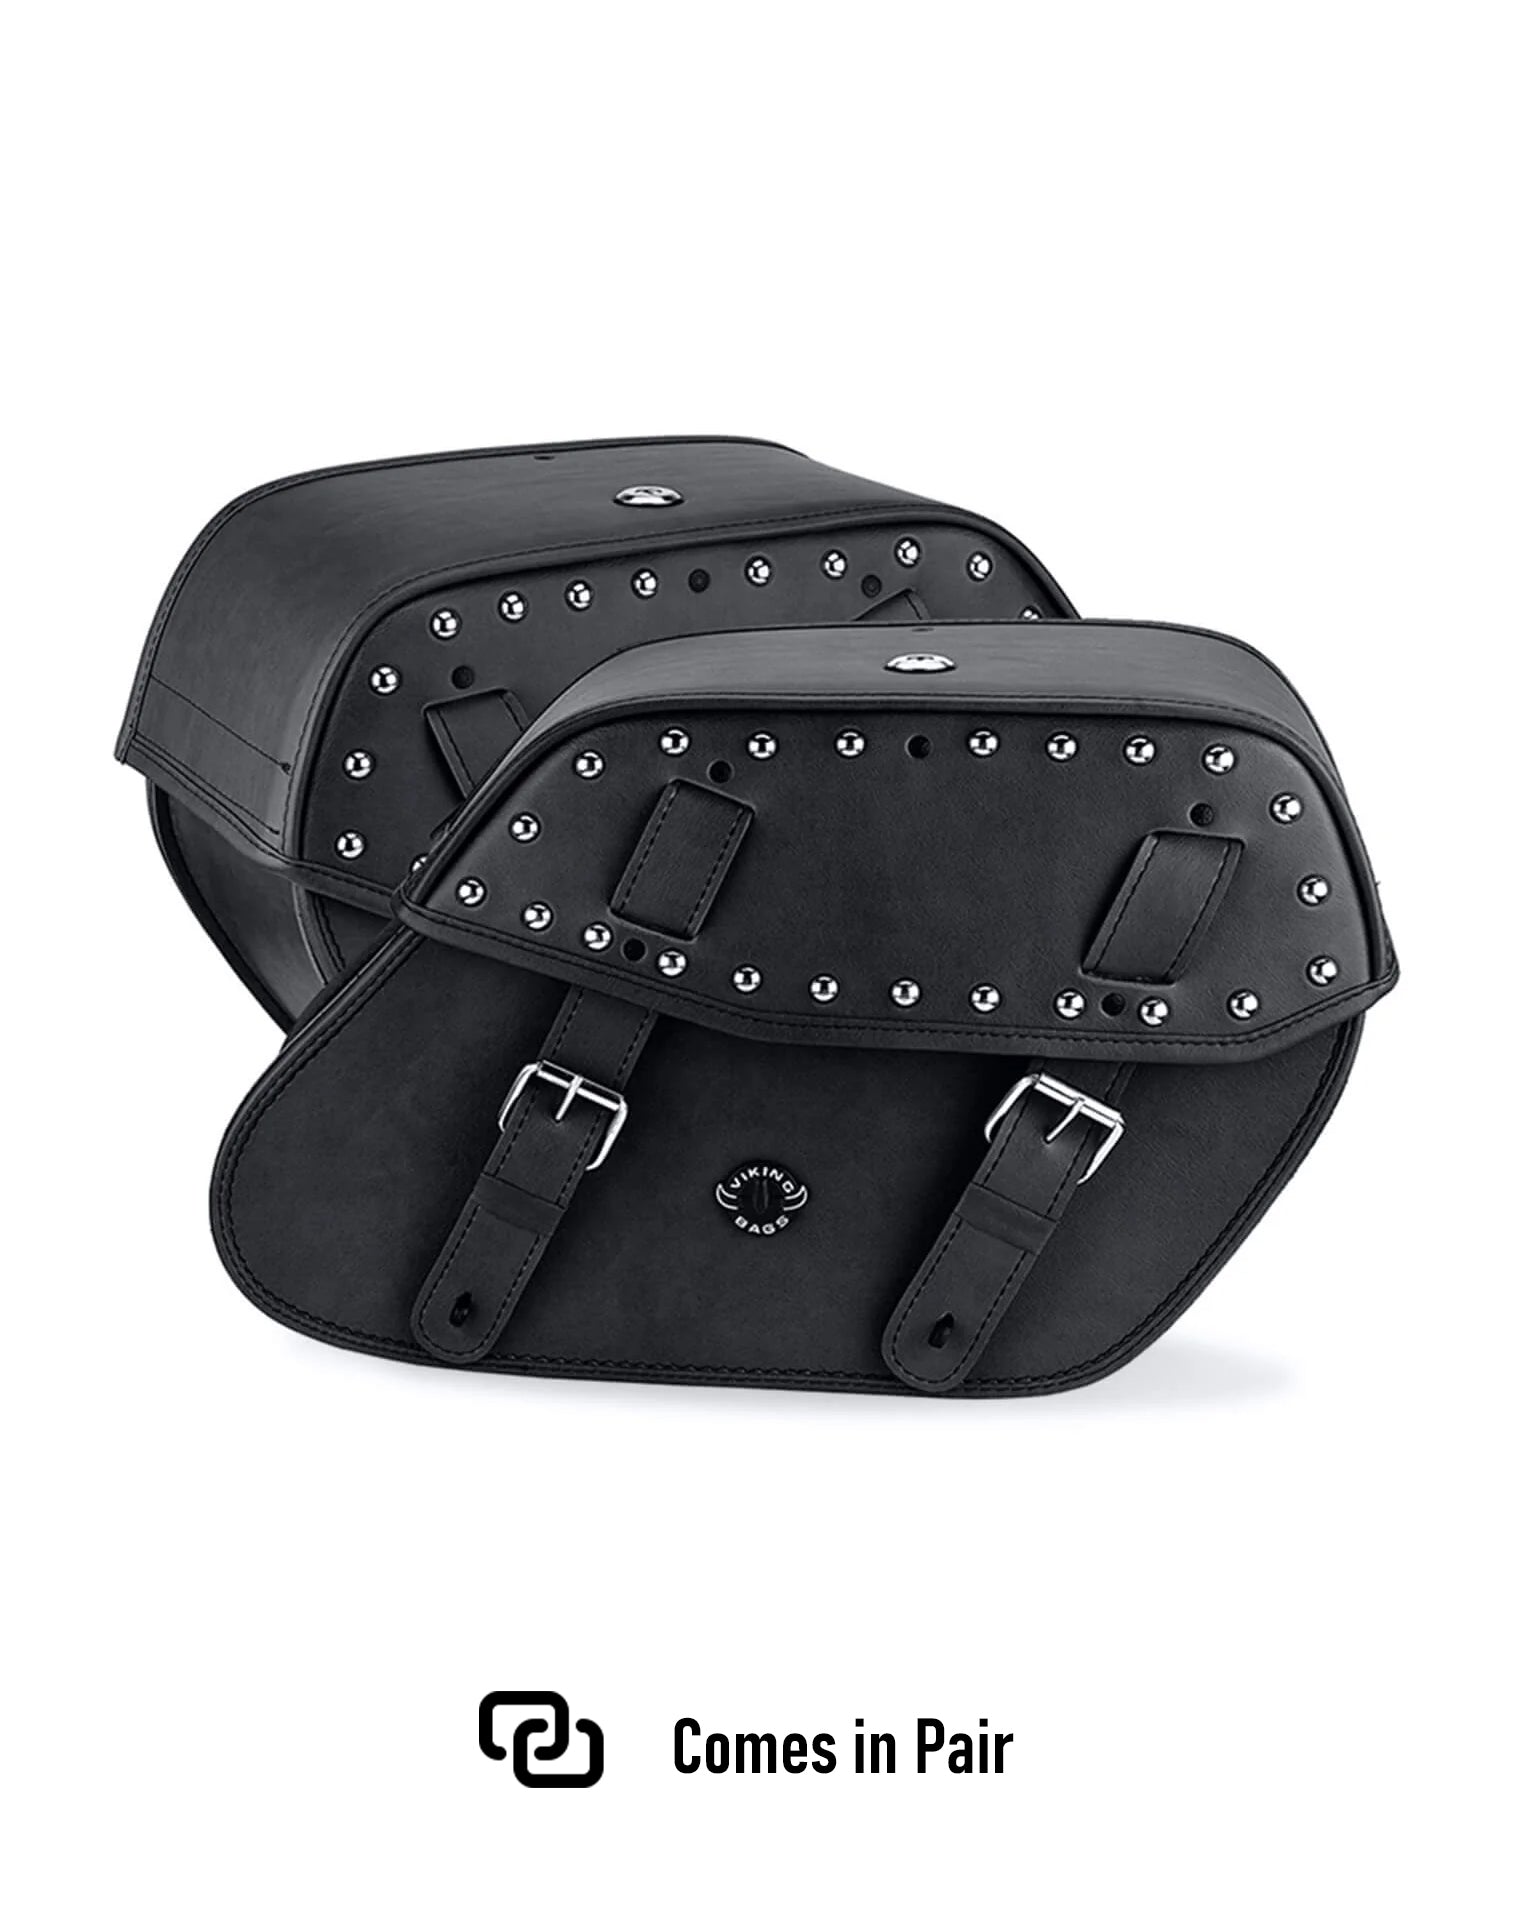 Viking Odin Large Suzuki Boulevard C50 Vl800 Leather Studded Motorcycle Saddlebags Weather Resistant Bags Comes in Pair